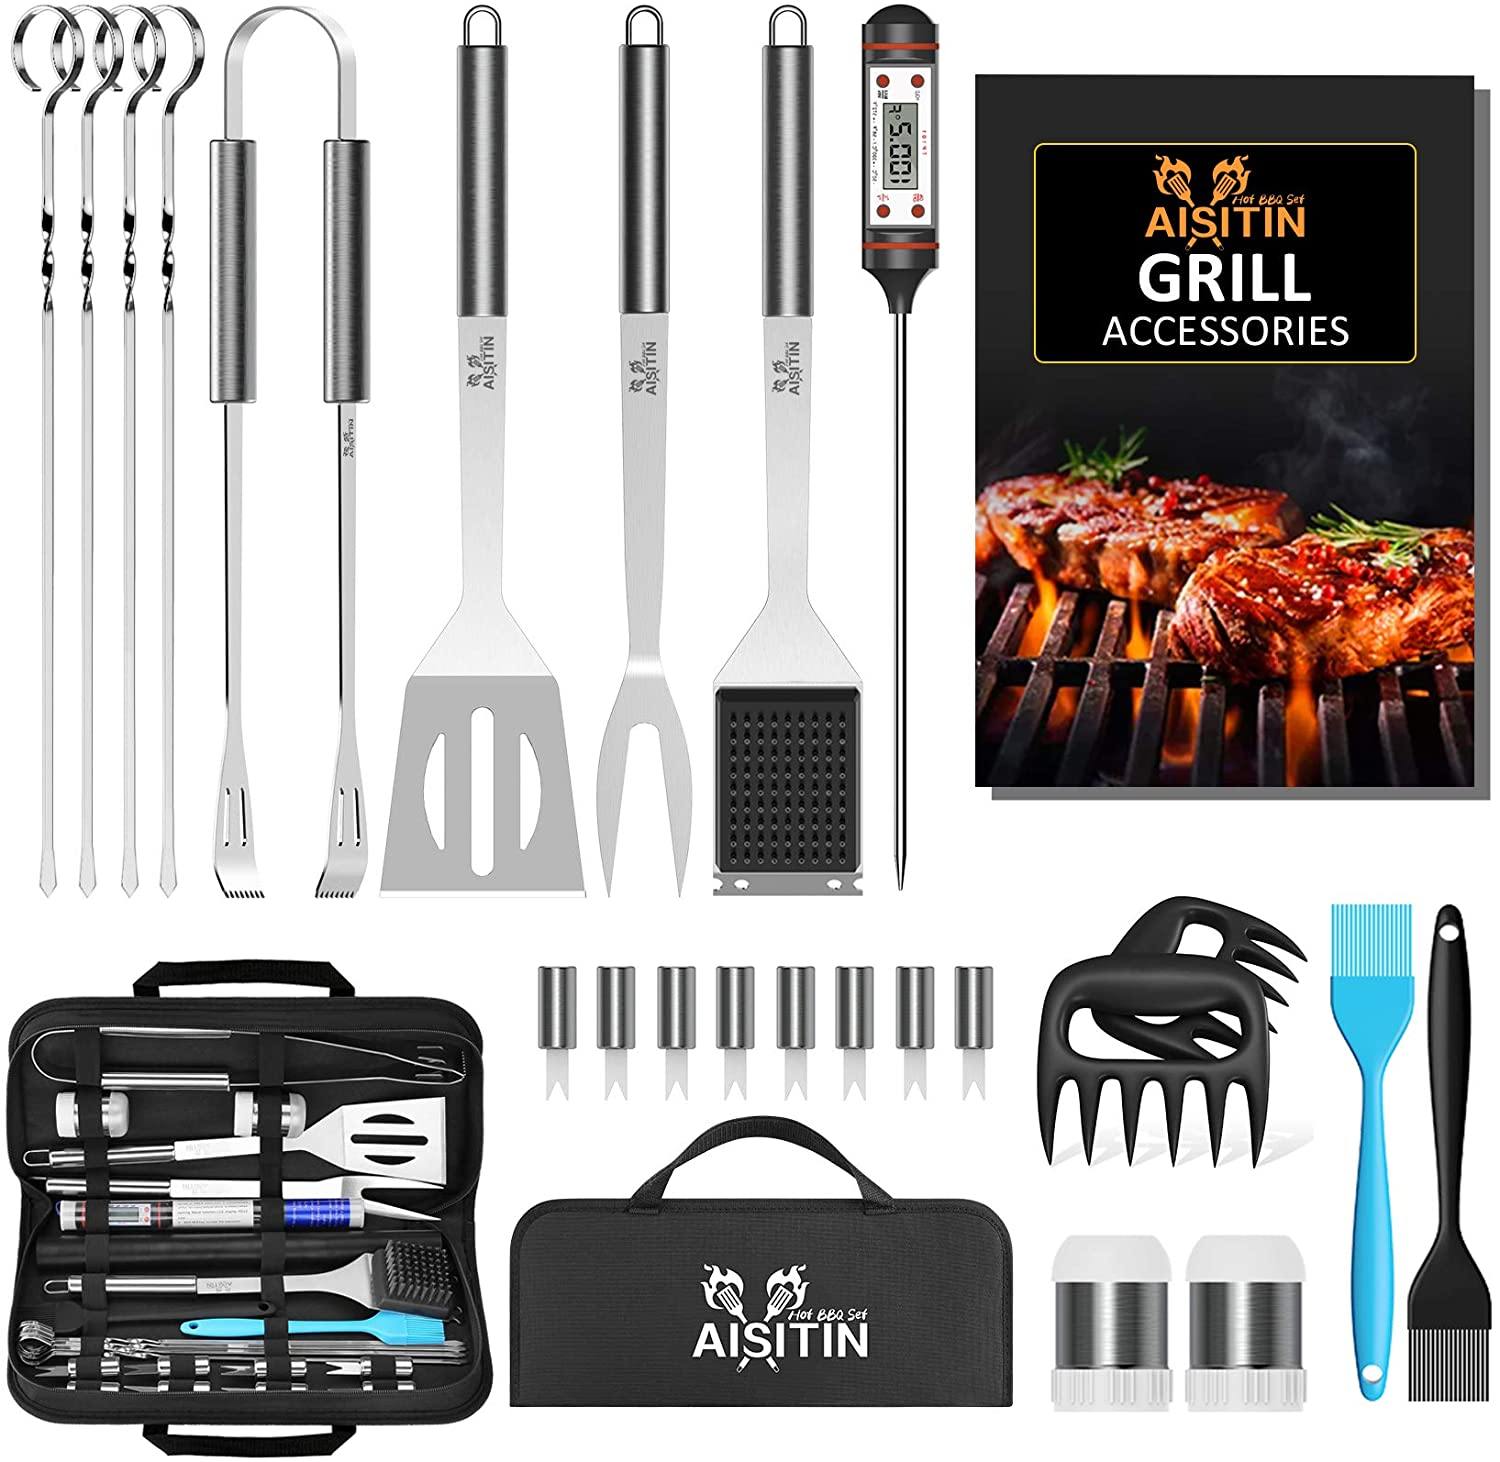 BBQ Grilling Accessories 16 Pcs Set, Stainless Steel Grill Tools Grilling  Accessories with Aluminum Case for Camping/Backyard Barbecue, Grill Utensils  Set for Men Women 